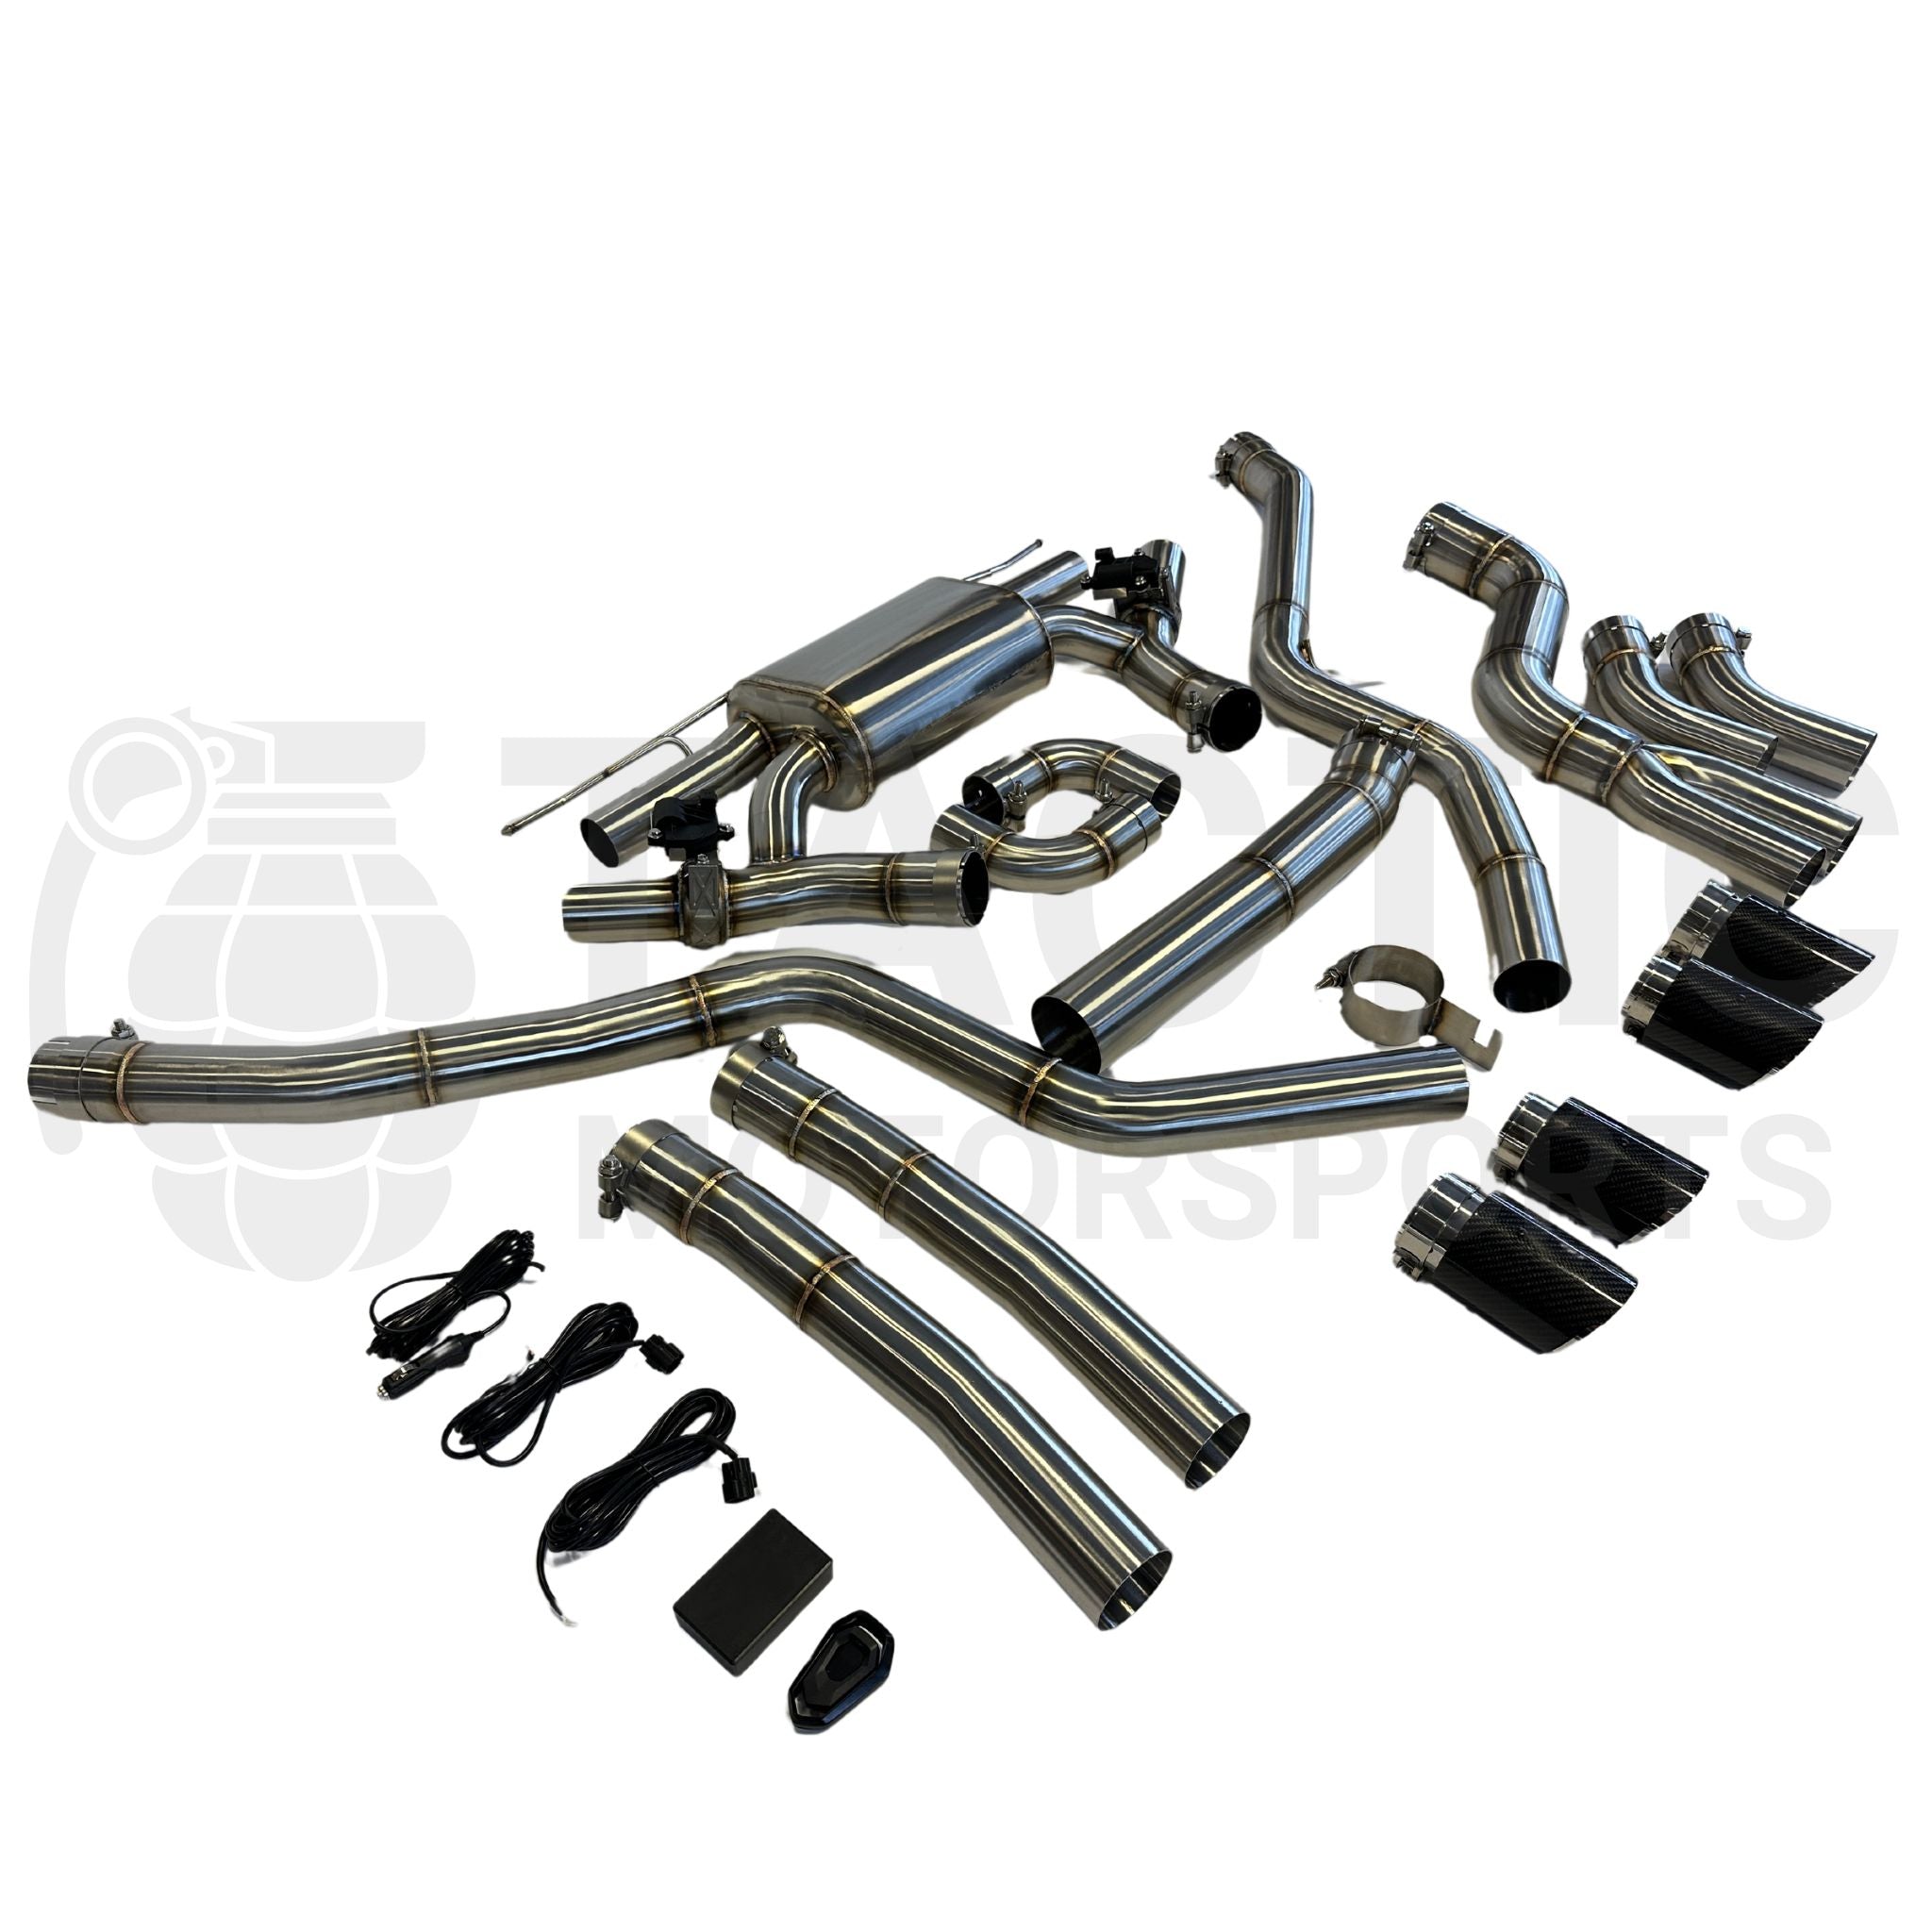 M340i M440i B58 Stainless Steel Valved Exhaust System